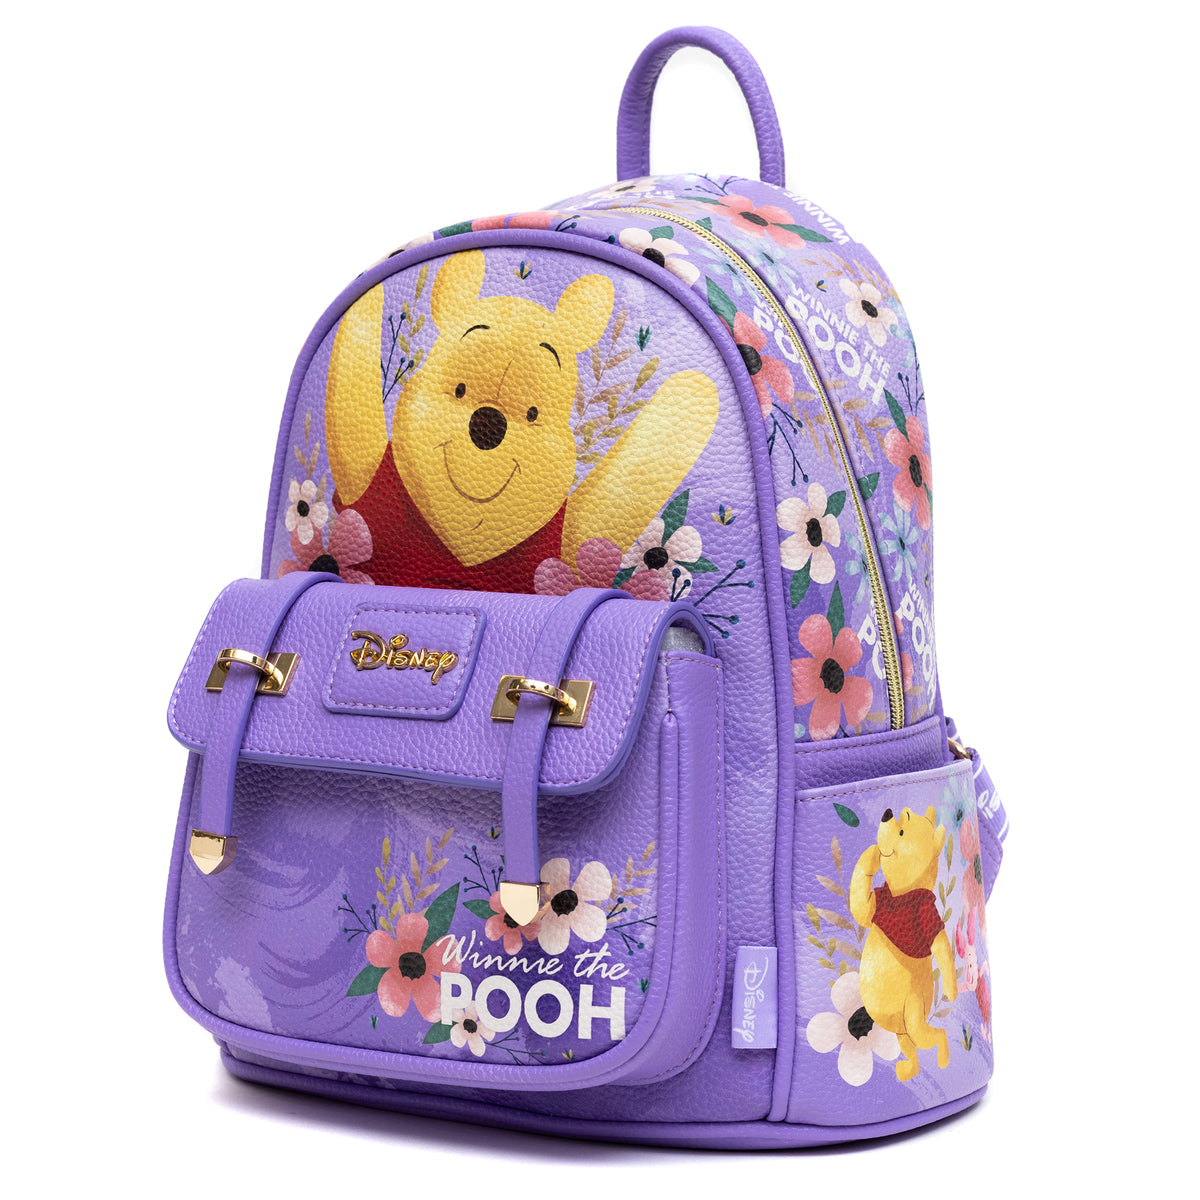 Disney Winnie the Pooh Mini Backpack - Limited Edition